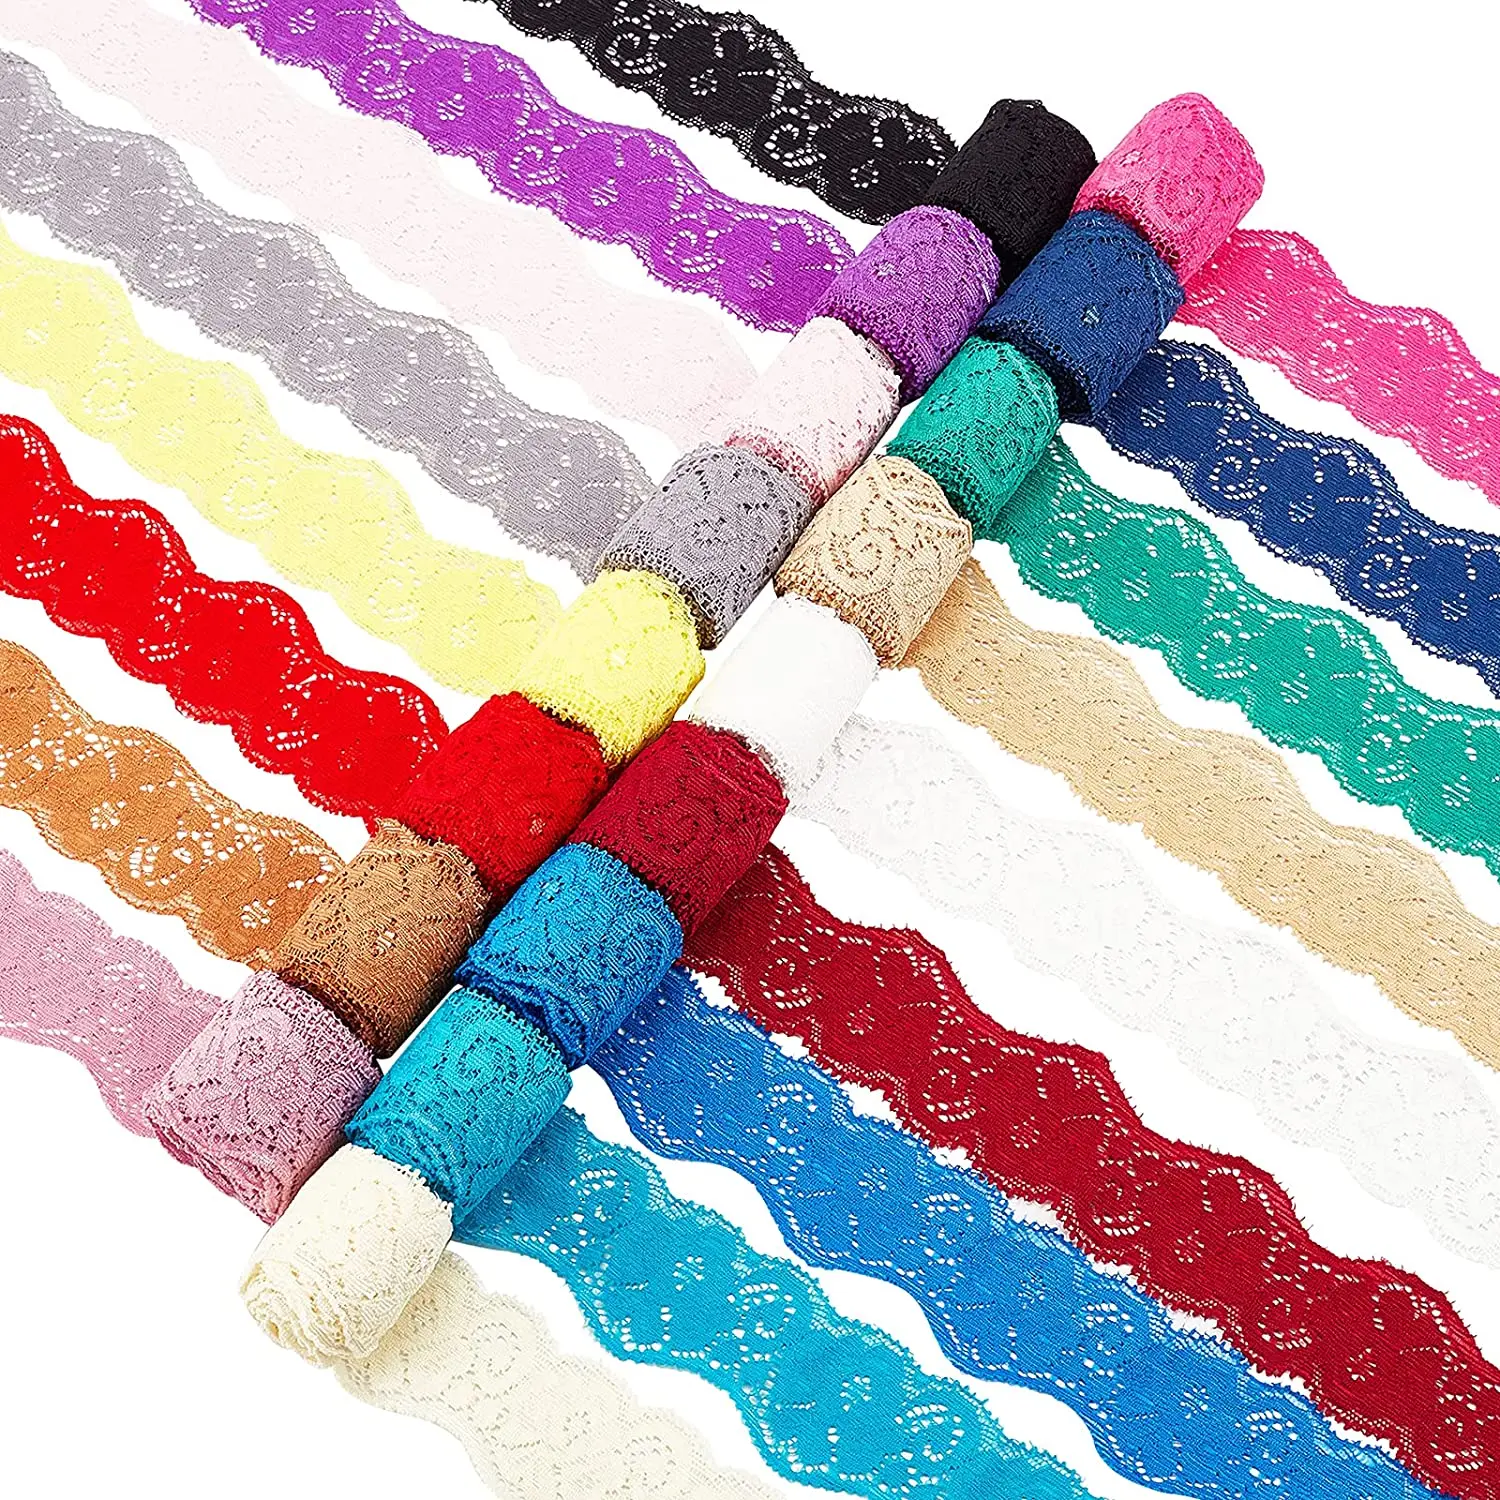 

34 Yards 1.4" Wide Fabric Lace Ribbon Elastic Lace Trim for Headbands Garters Wedding Bouquet Making -17 Colors 2 Yard Per Color